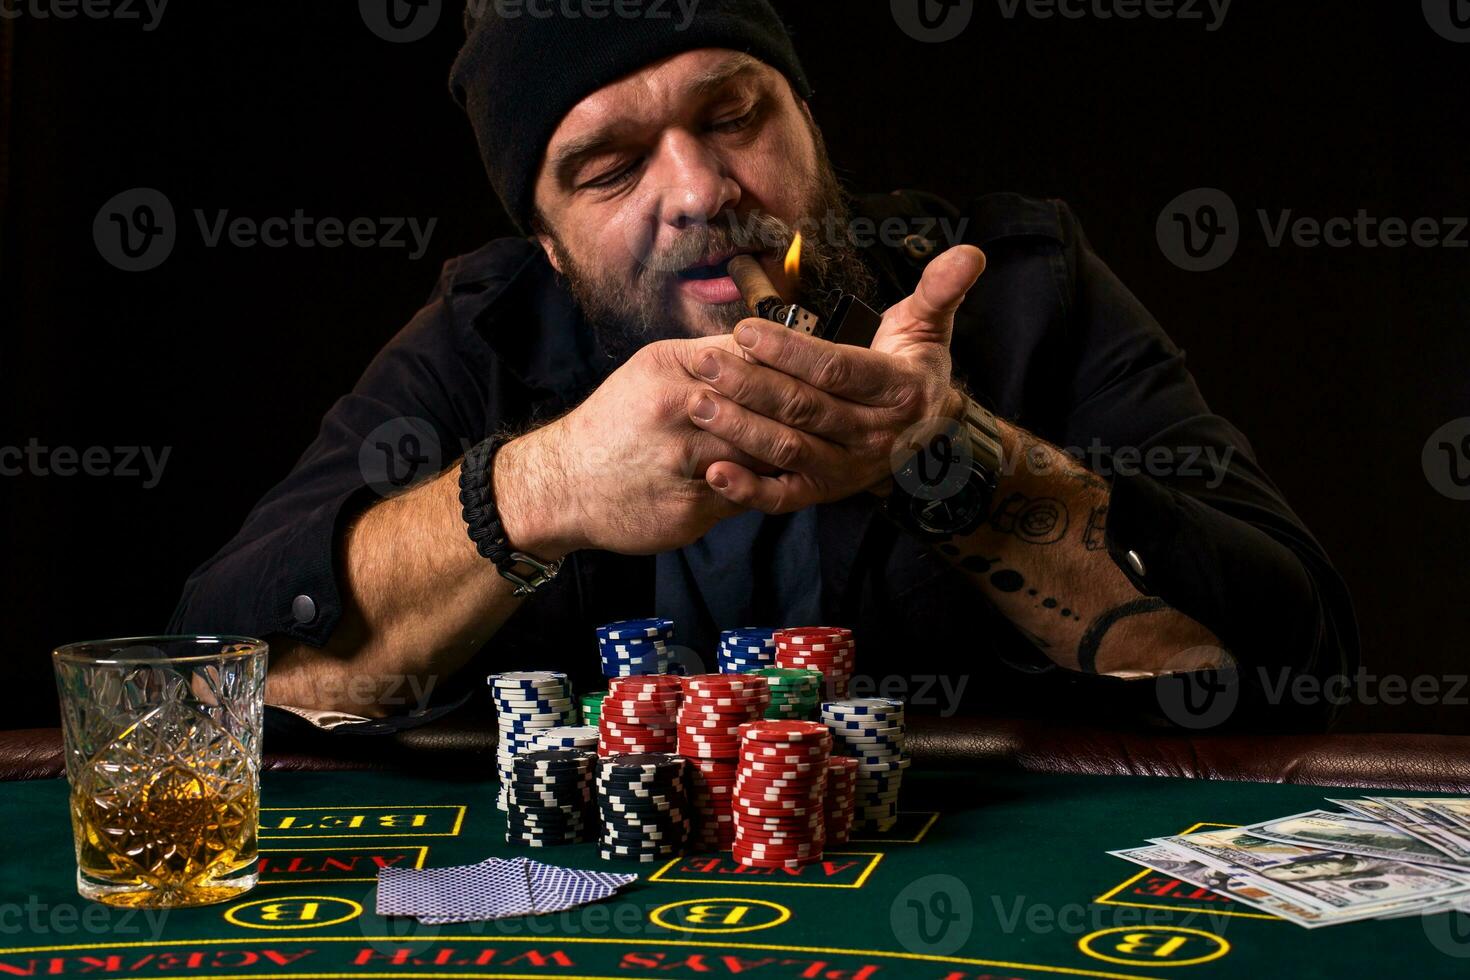 Bearded man with cigar and glass sitting at poker table in a casino. Gambling, playing cards and roulette. photo